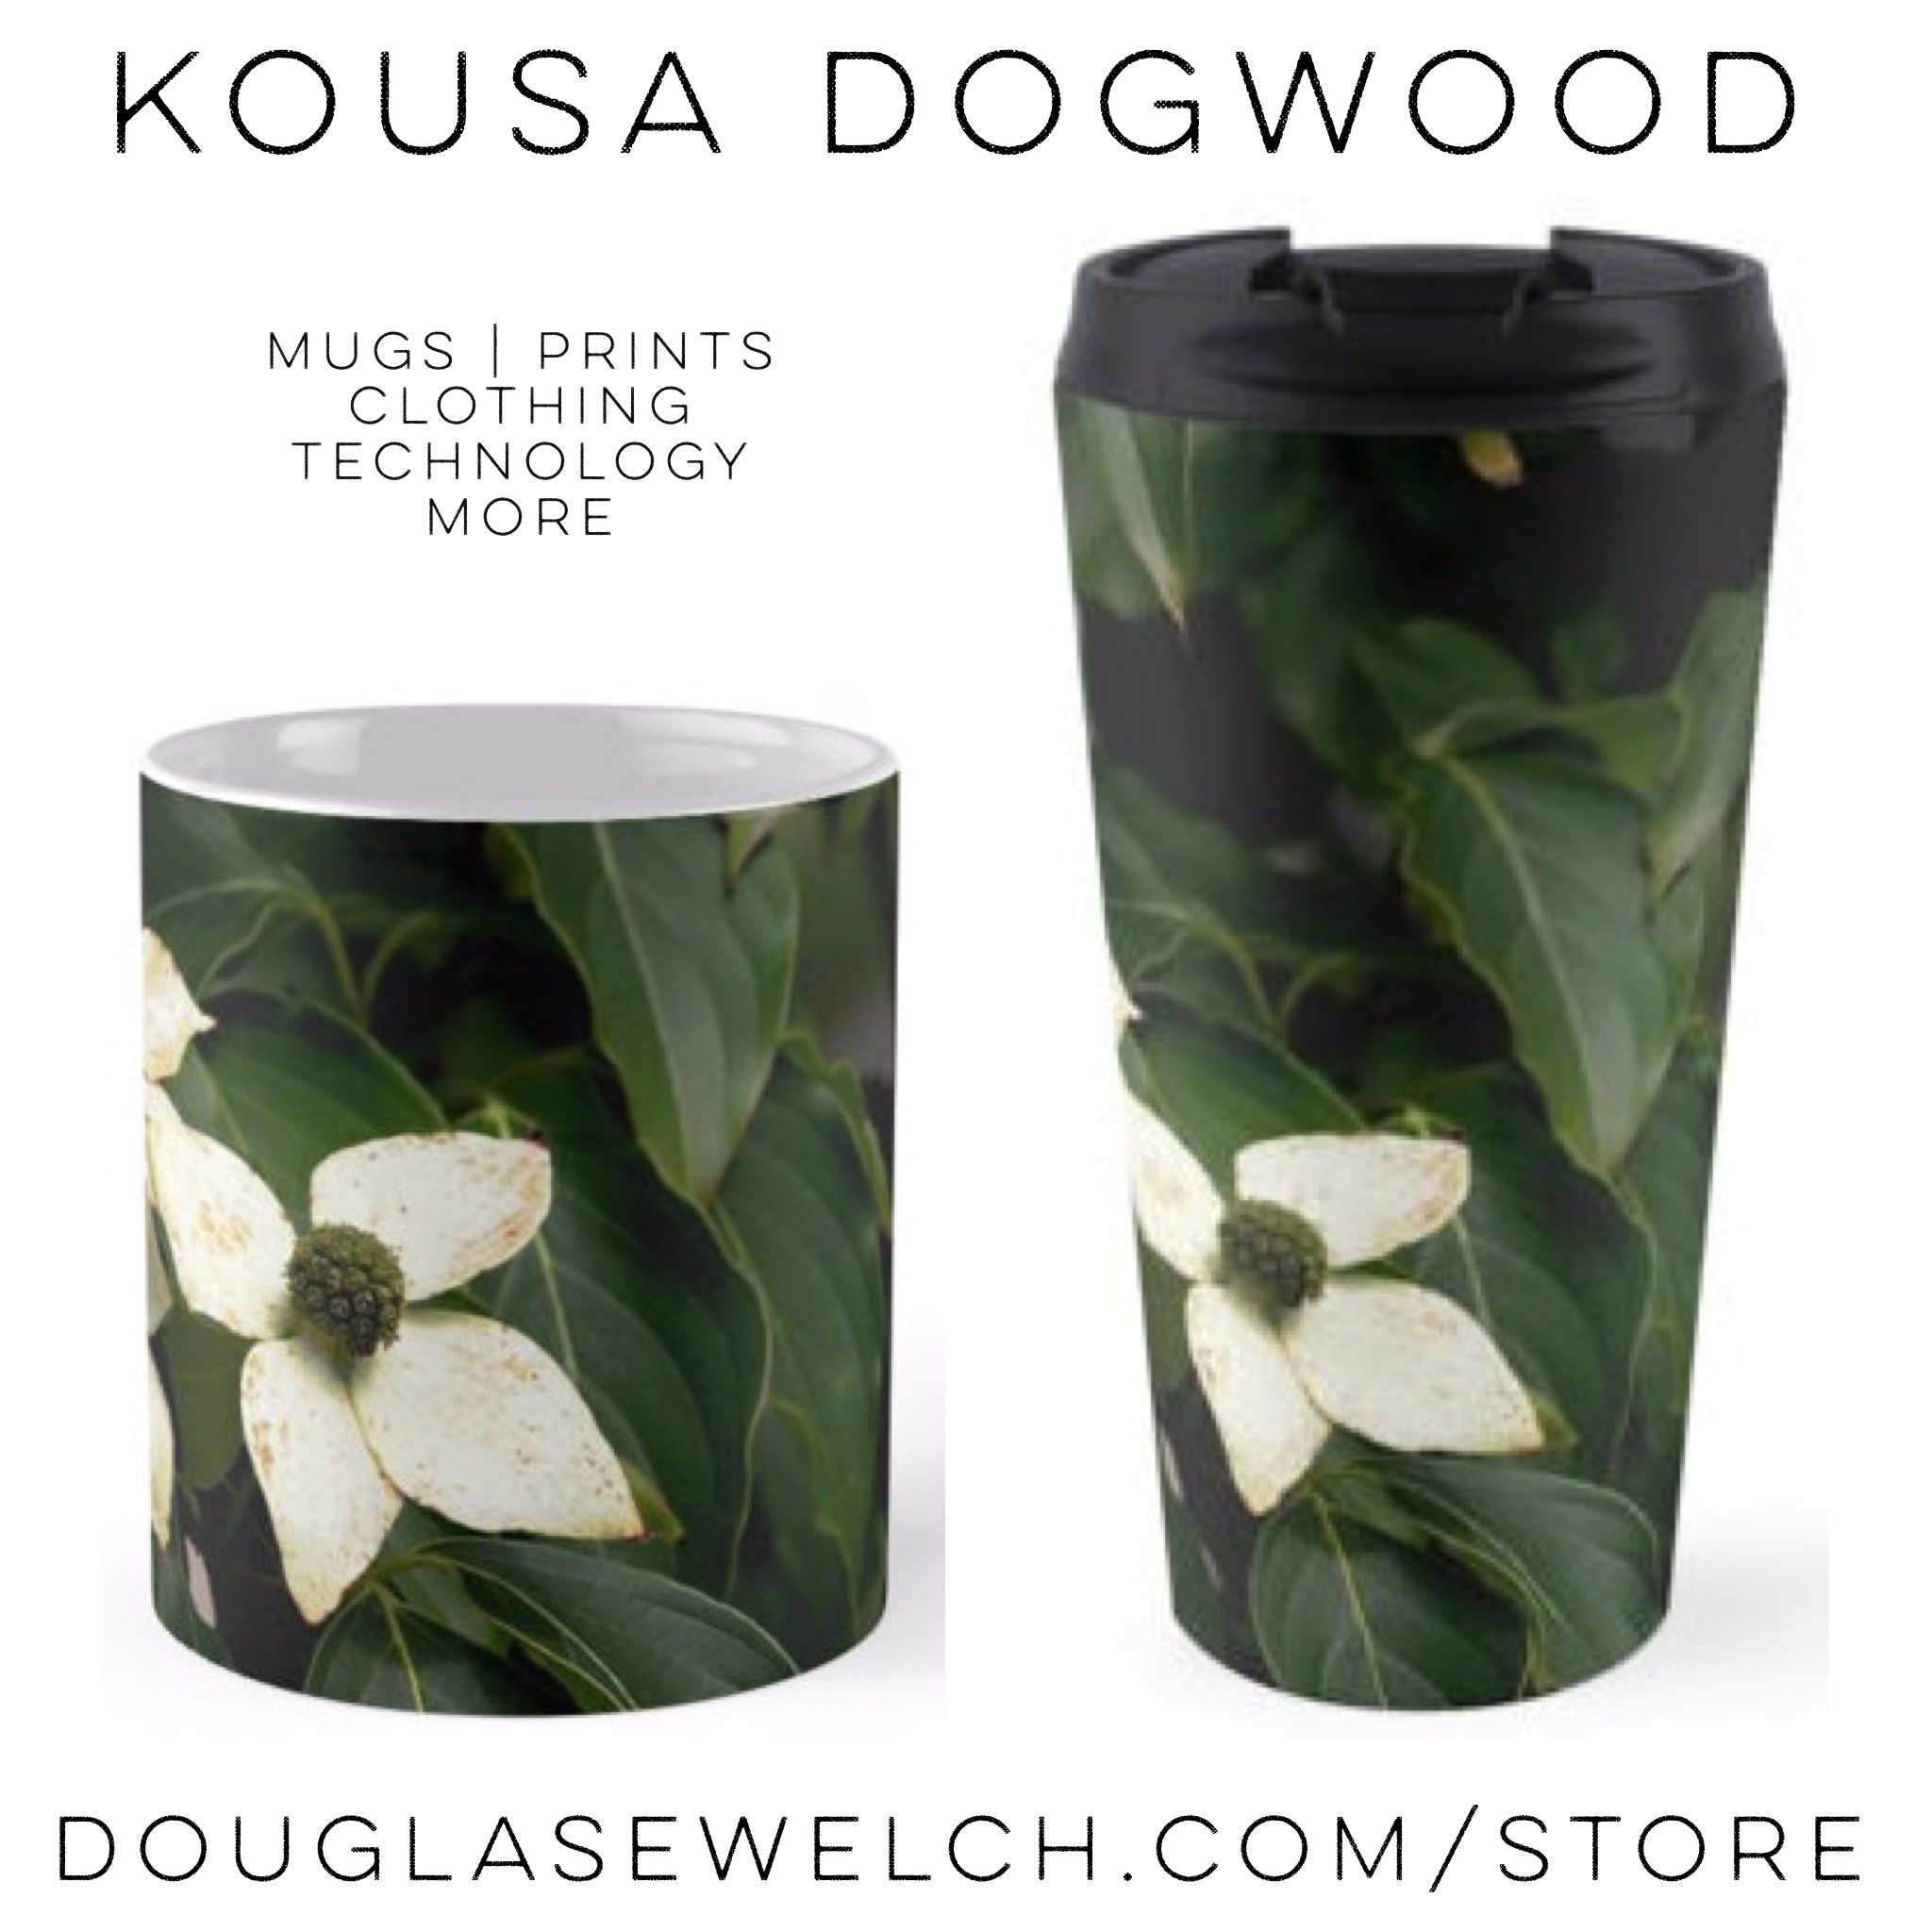 Get these Kousa Dogwood Mugs and Much More! Exclusively from Douglas E. Welch